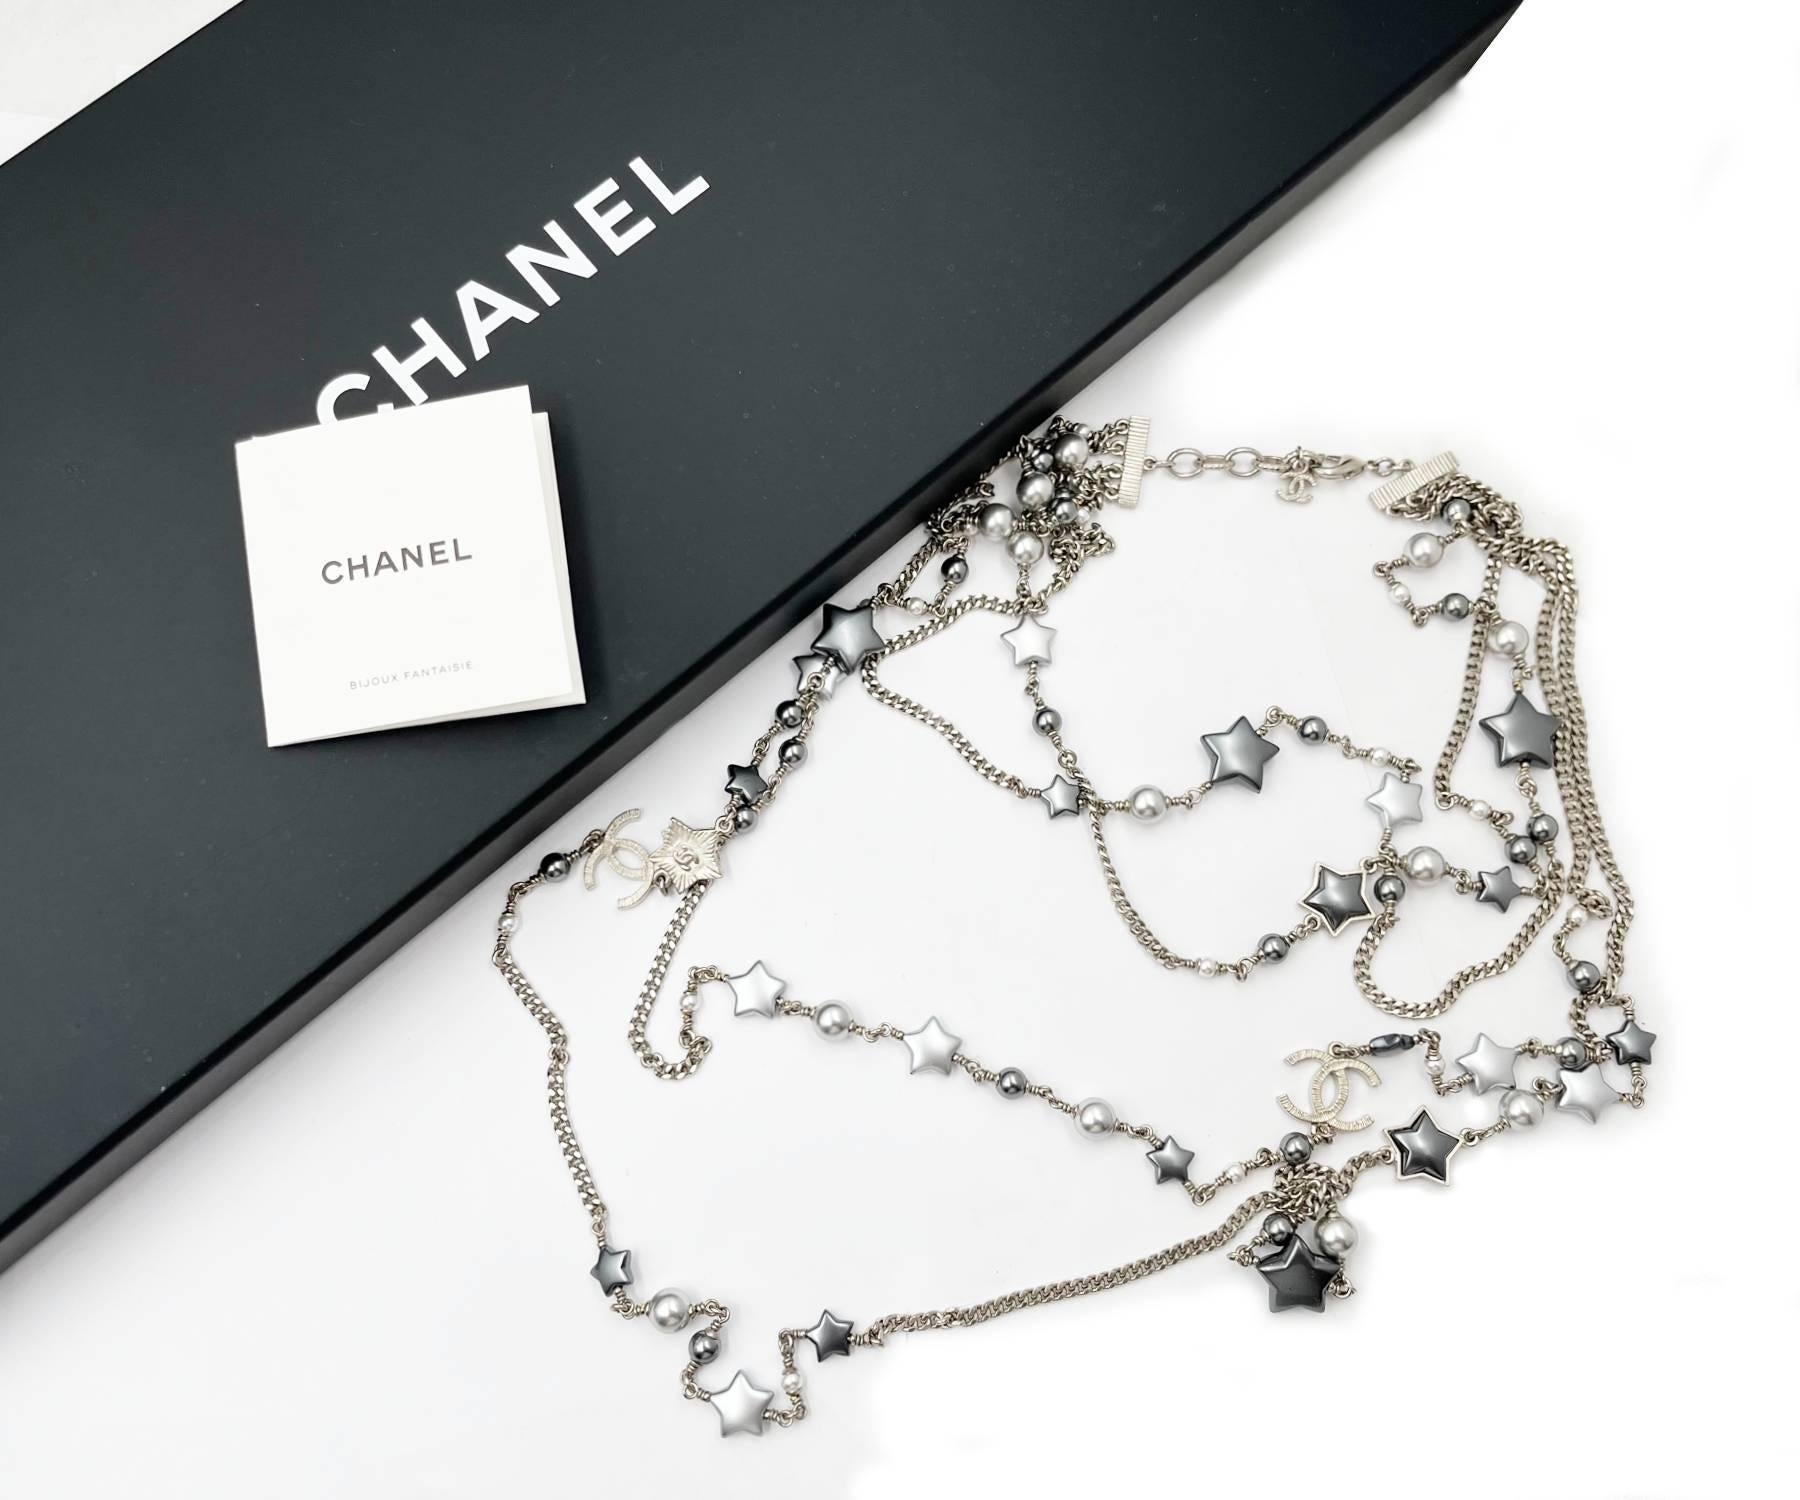 Chanel Silver CC Grey Stars 4 Strand Chain Necklace

*Marked 17
*Made in Italy
*Comes with the original box and pouch

-The pendants are approximately 0.75″ x 0.5″.
-The longest chain is approximately 36″ long.
-Very classic and pretty
-In a